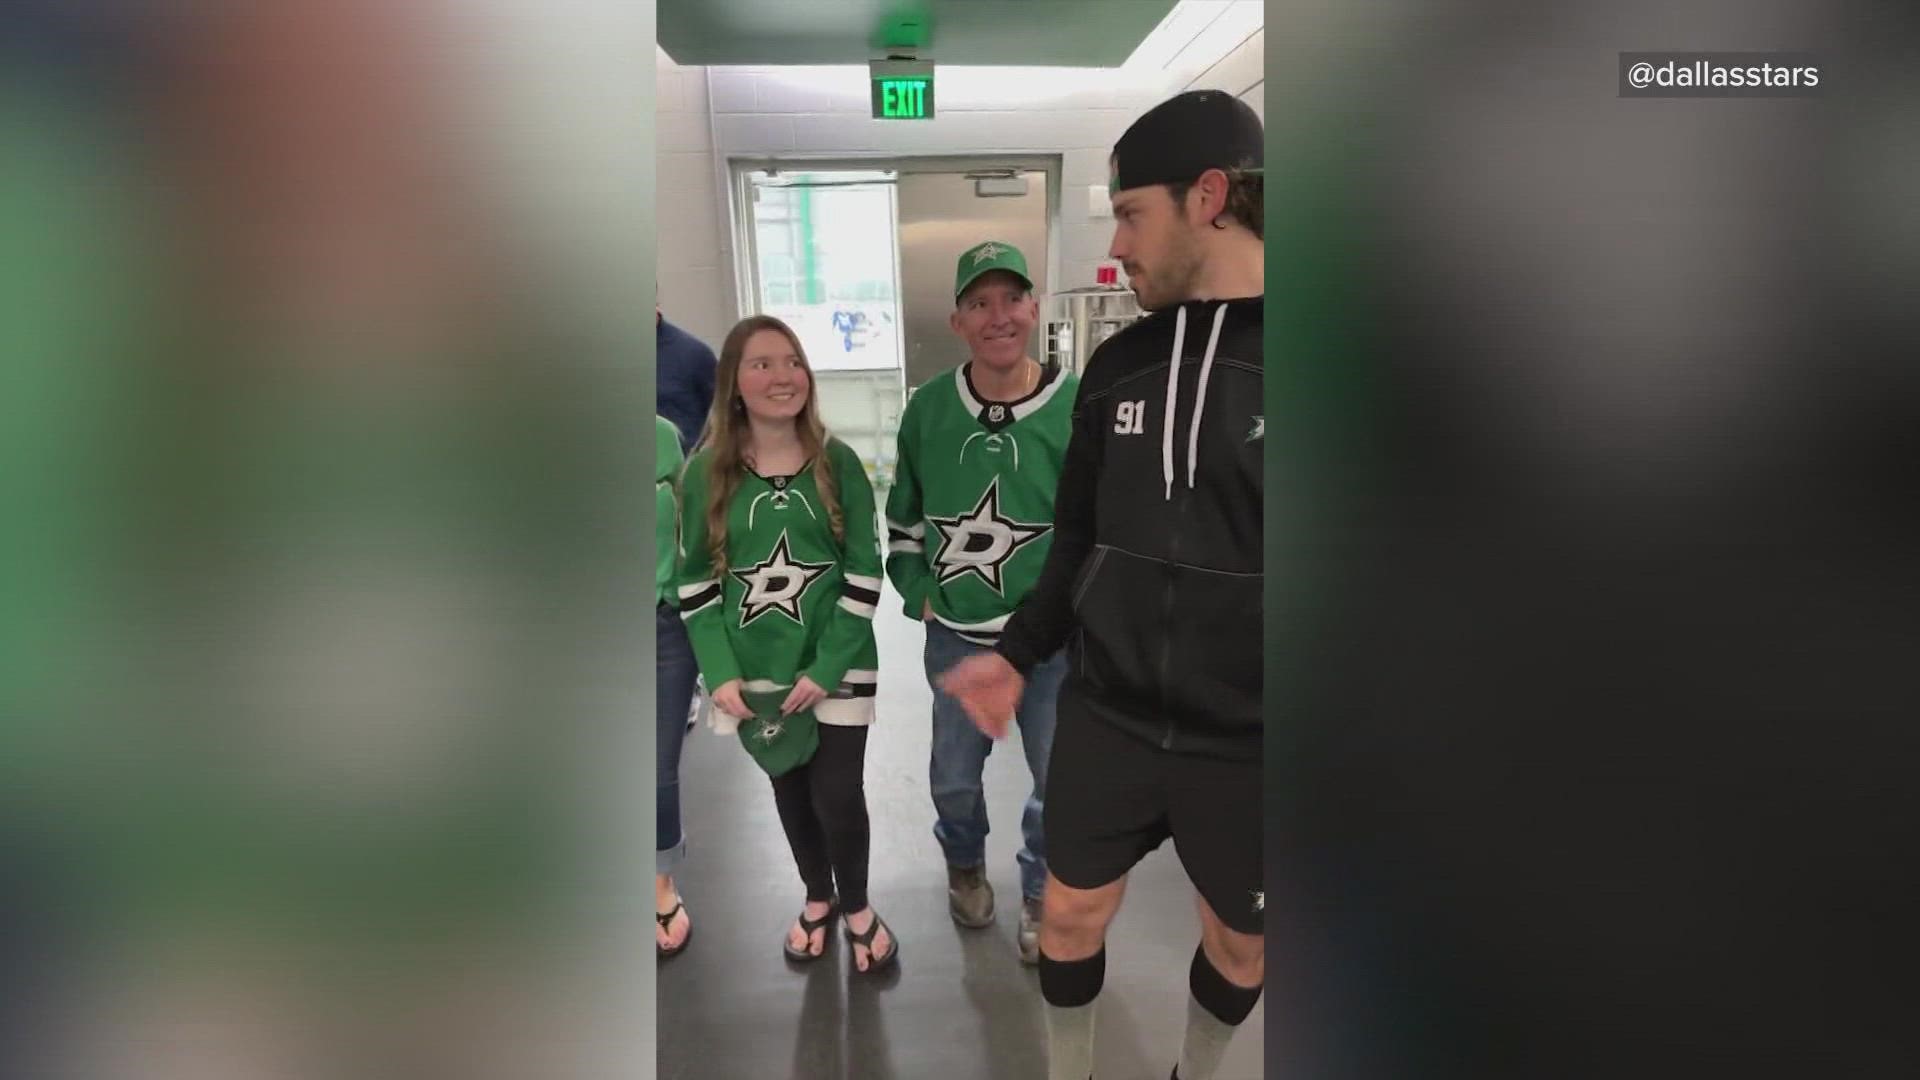 Seguin invited Chelsea and her family to a tour after learning about her upcoming brain surgery.